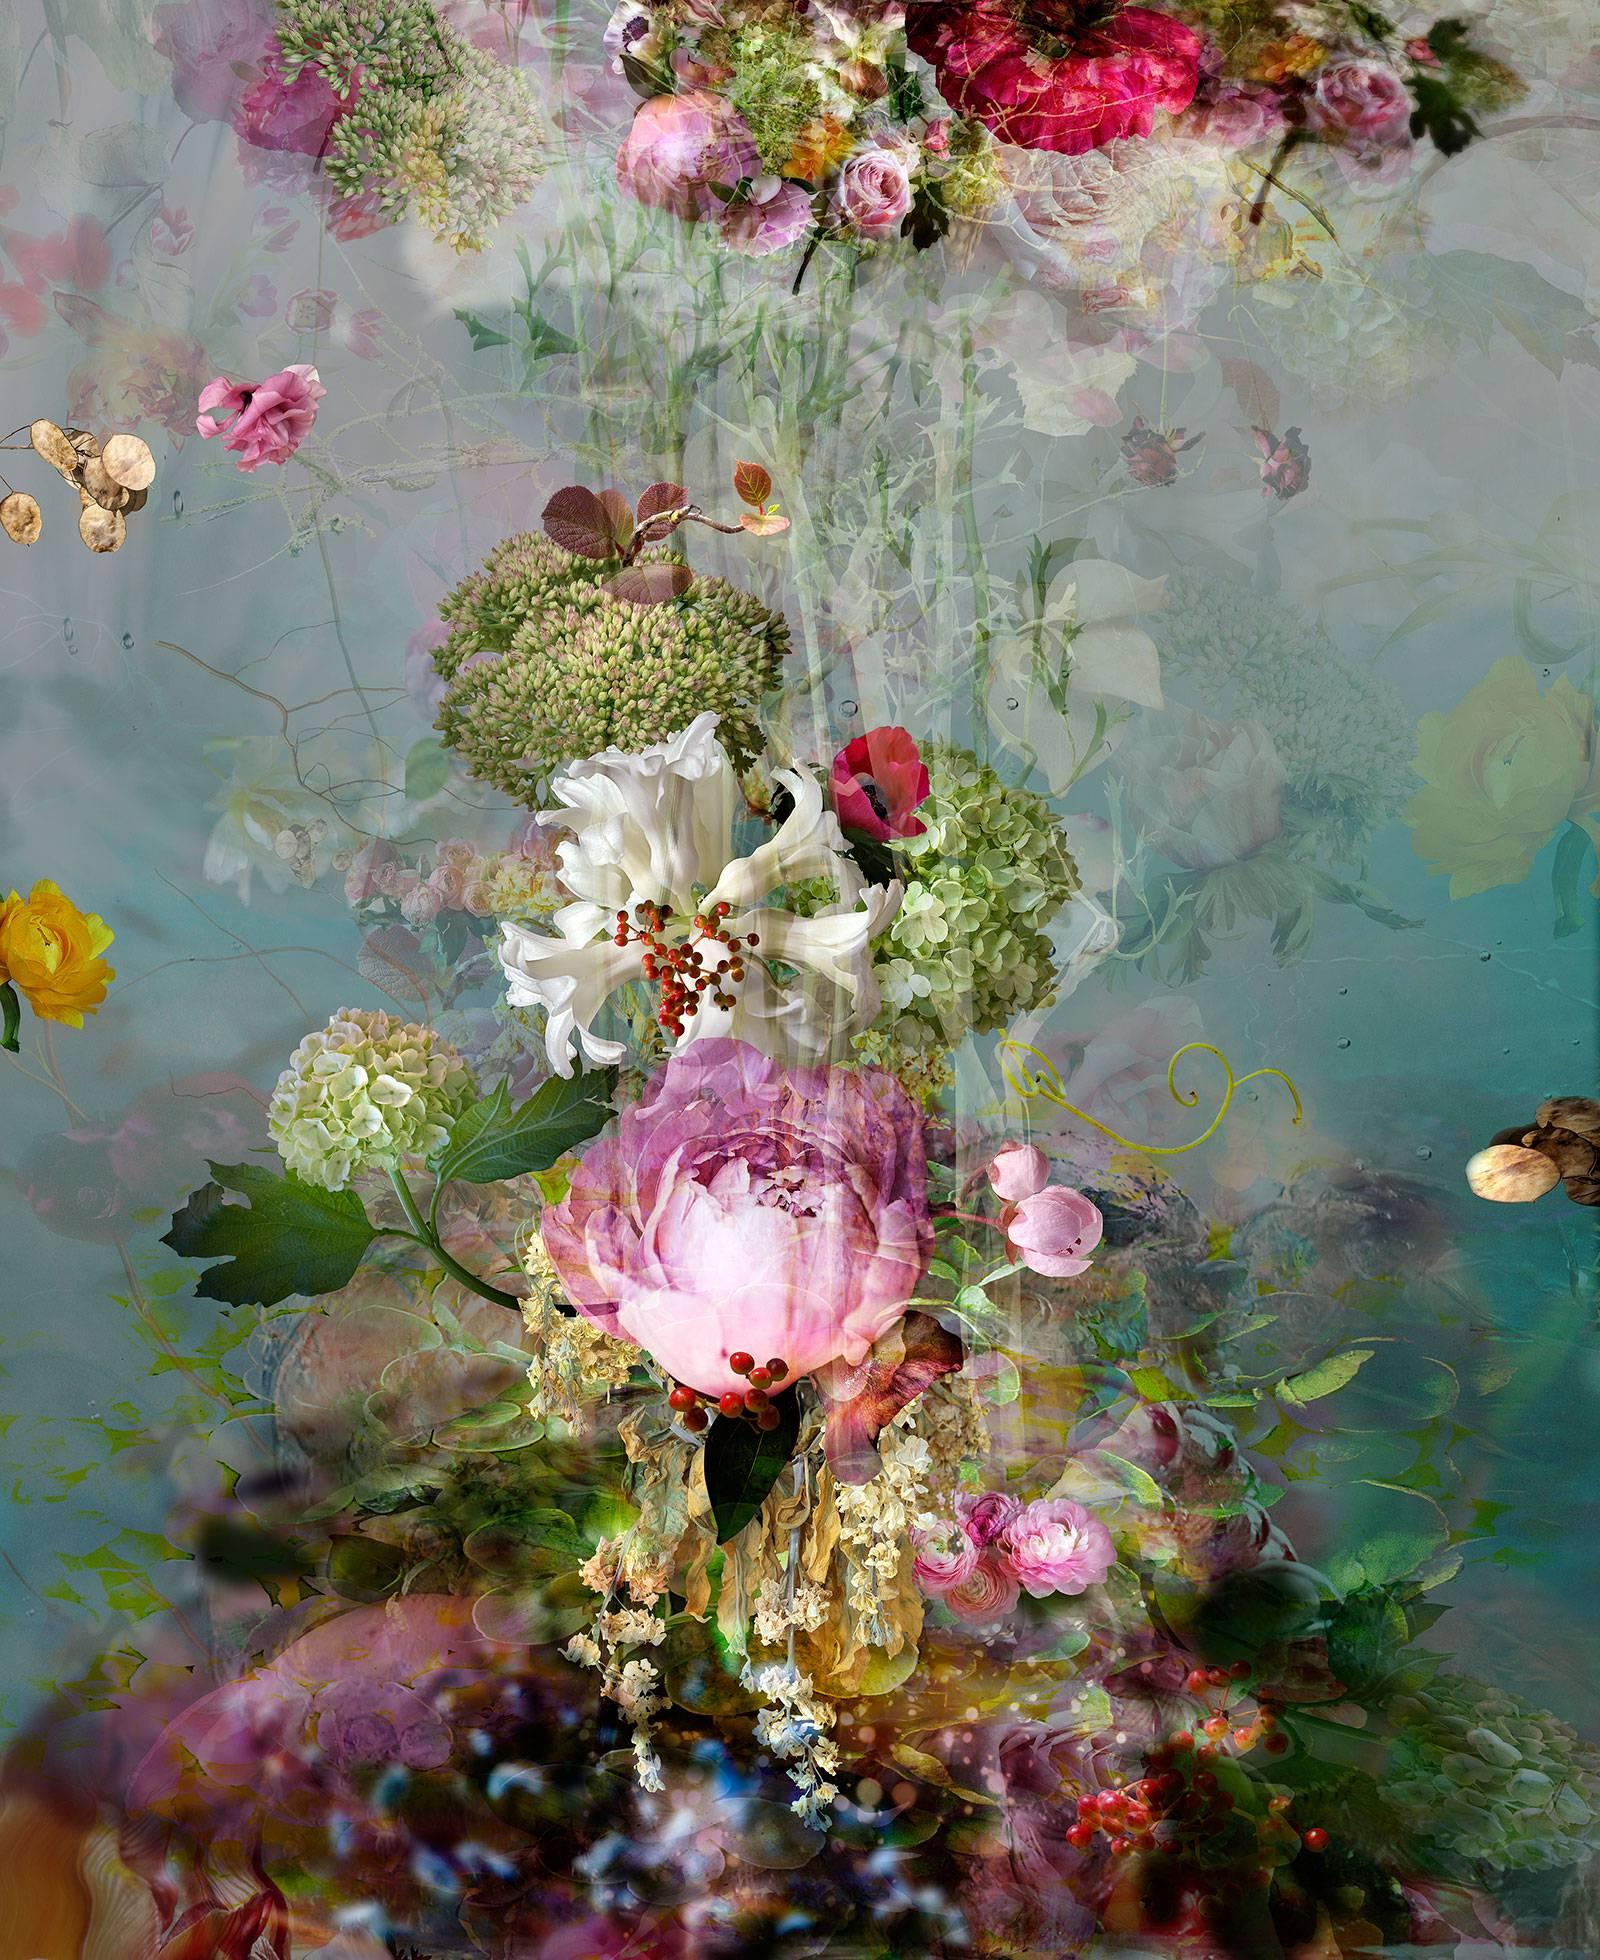 Isabelle Menin Still-Life Photograph - Sinking #3 - Floral still life abstract contemporary colorful photography